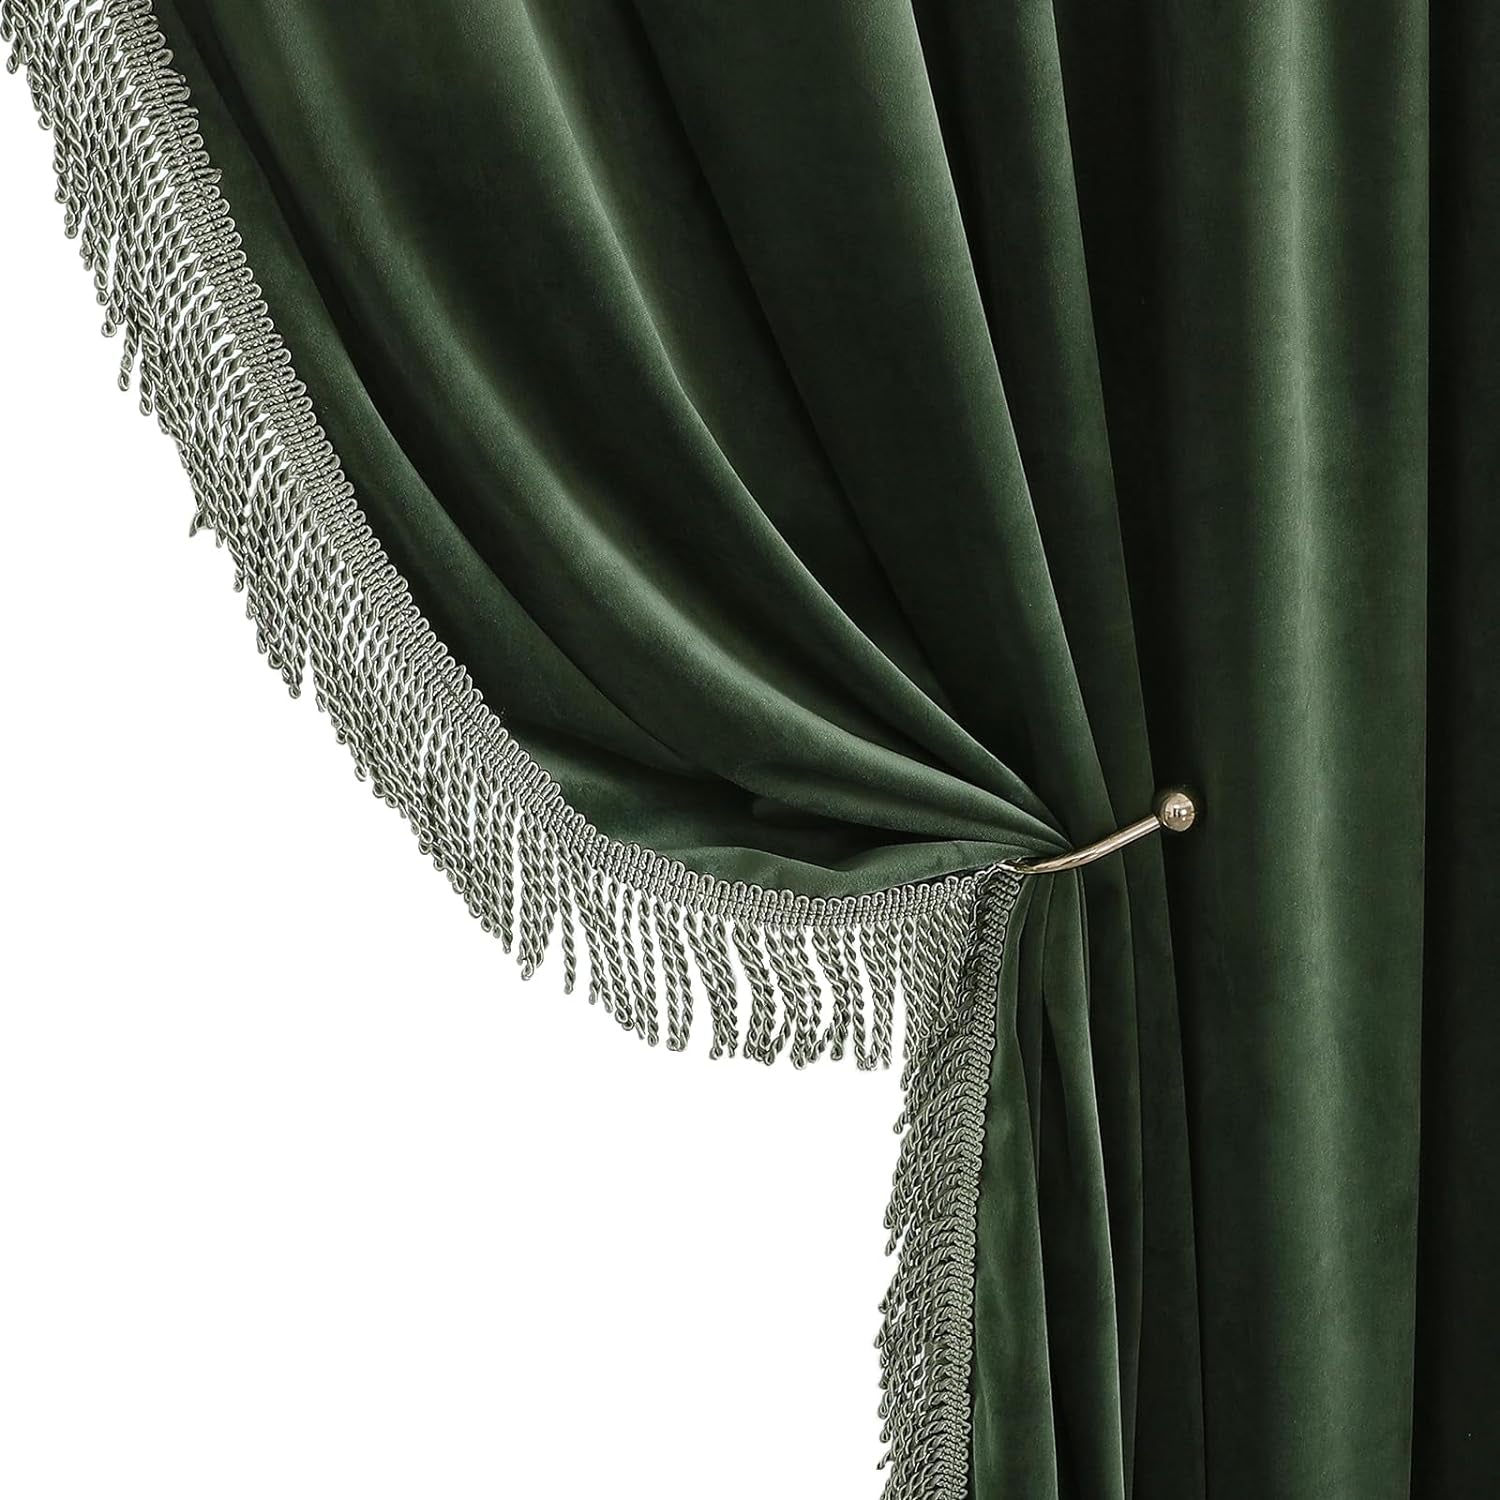 Benedeco Green Velvet Curtains for Bedroom Window, Super Soft Luxury Drapes, Room Darkening Thermal Insulated Rod Pocket Curtain for Living Room, W52 by L84 Inches, 2 Panels  Benedeco Green-Tassel W52 * L63 | 2 Panels 